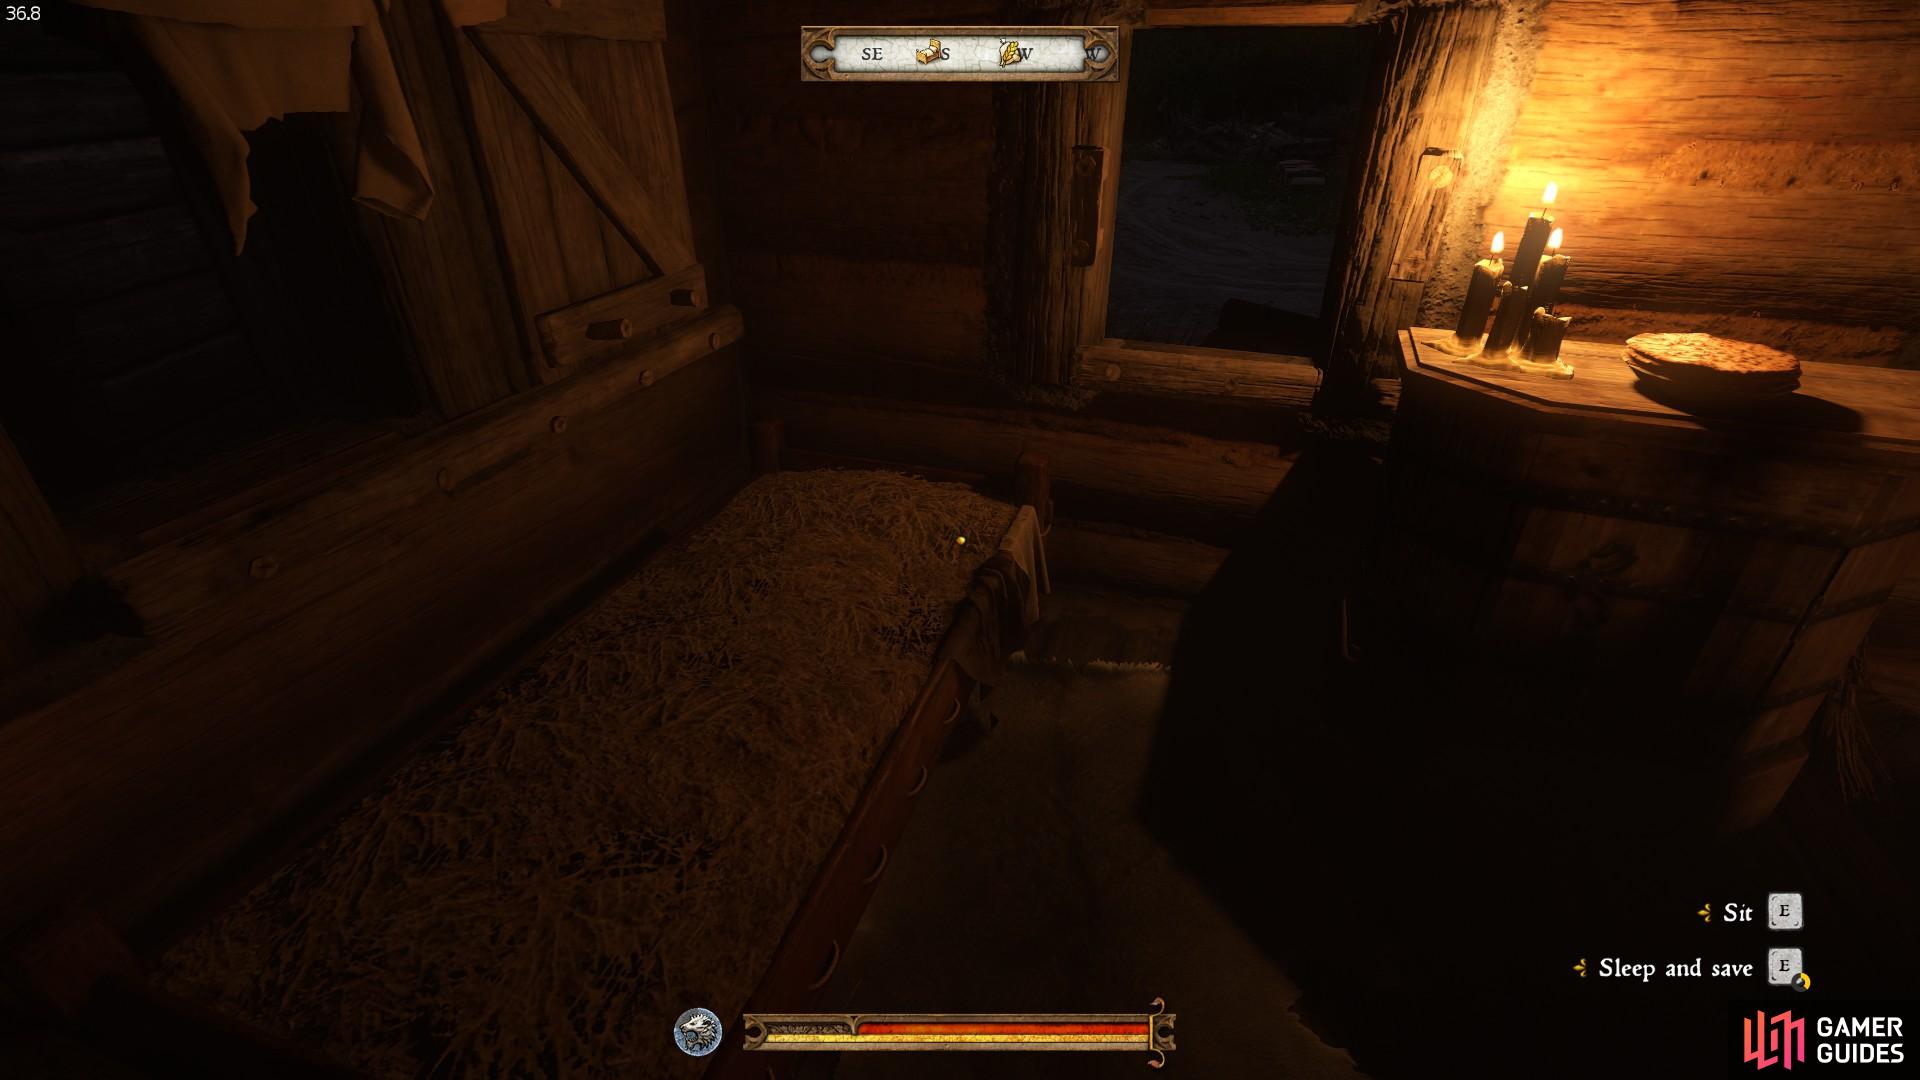 Example of a bed which Henry can use to save the game.